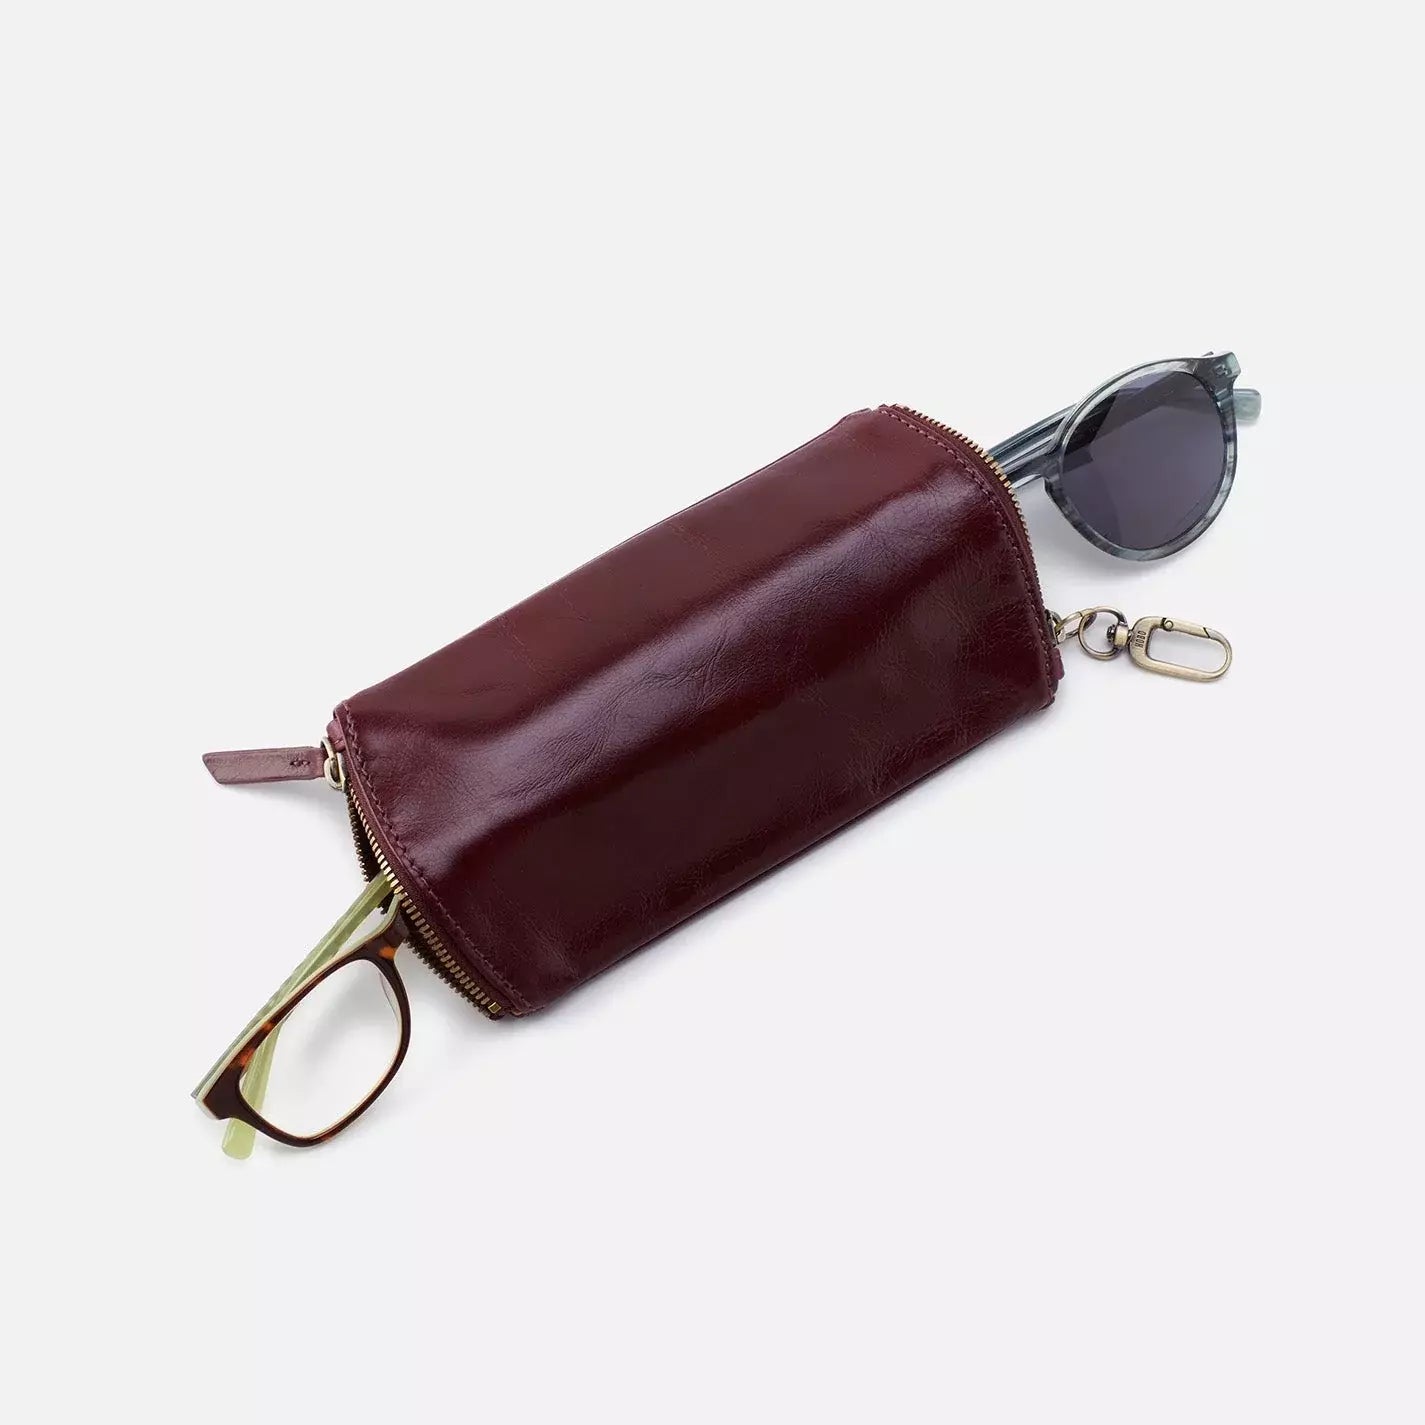 The Spark in merlot is a double eyeglass case that has an easy-to-use clip for attaching to your bag and two compartments for your favorite glasses. Find it at the Painted Cottage in Edgewater, MD